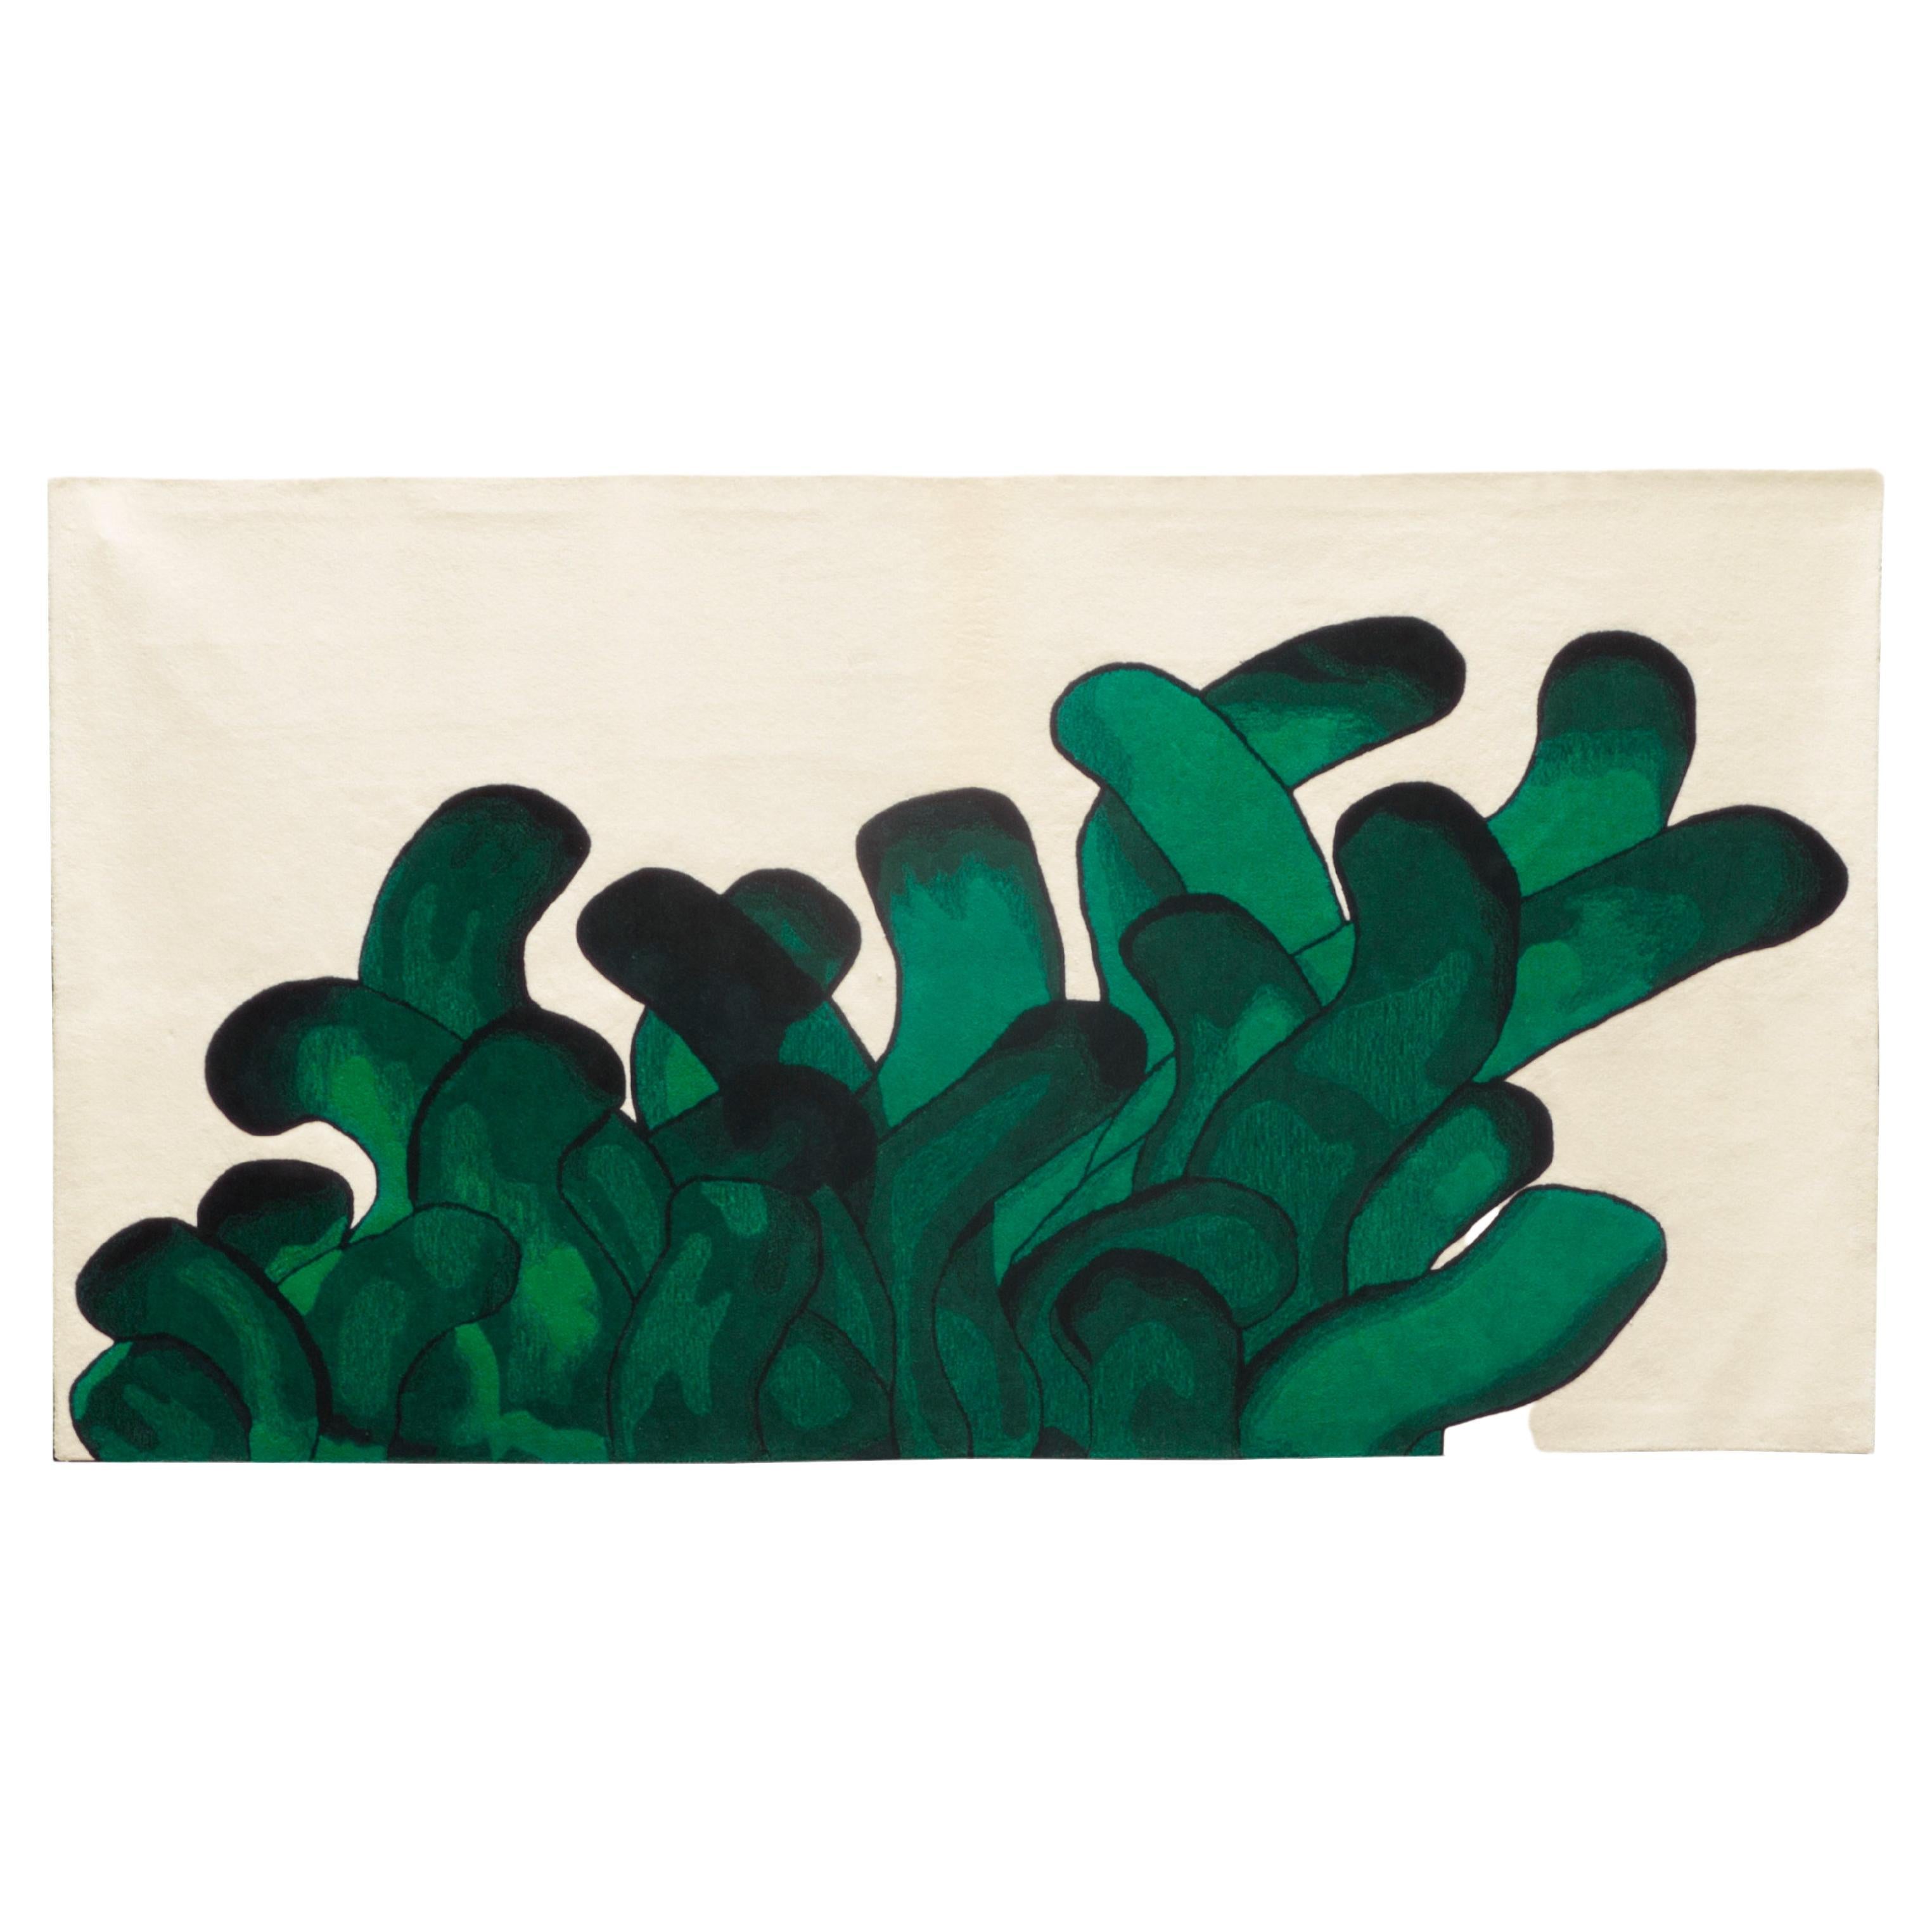 Green Anemone Rug by François Dumas for La Chance For Sale